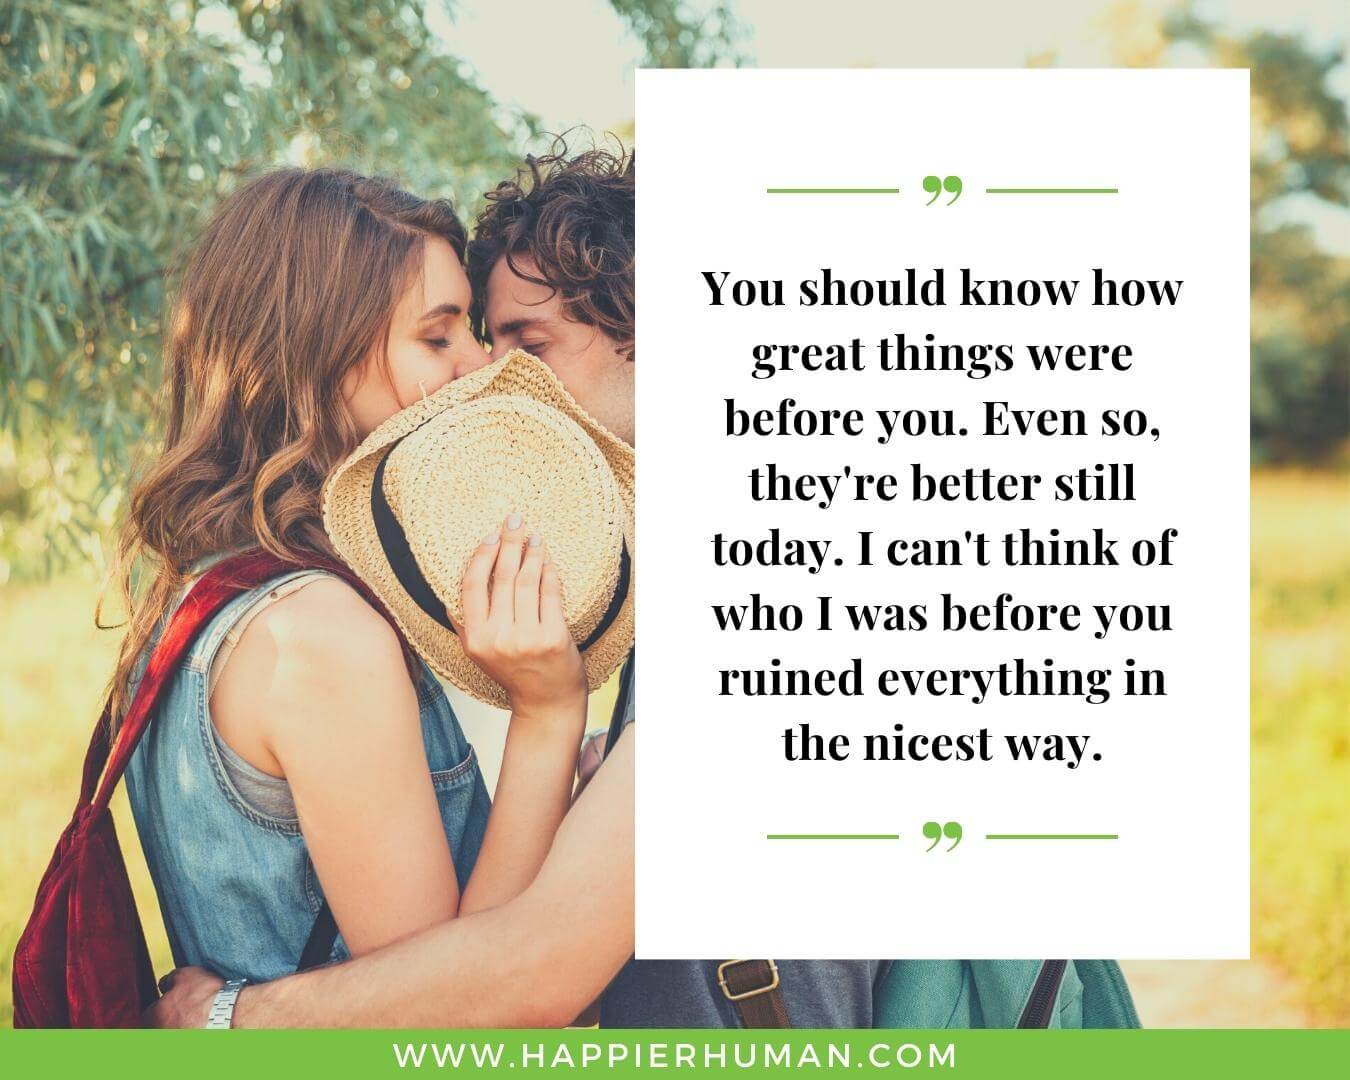 Unconditional Love Quotes for Her - “You should know how great things were before you. Even so, they're better still today. I can't think of who I was before you ruined everything in the nicest way.”